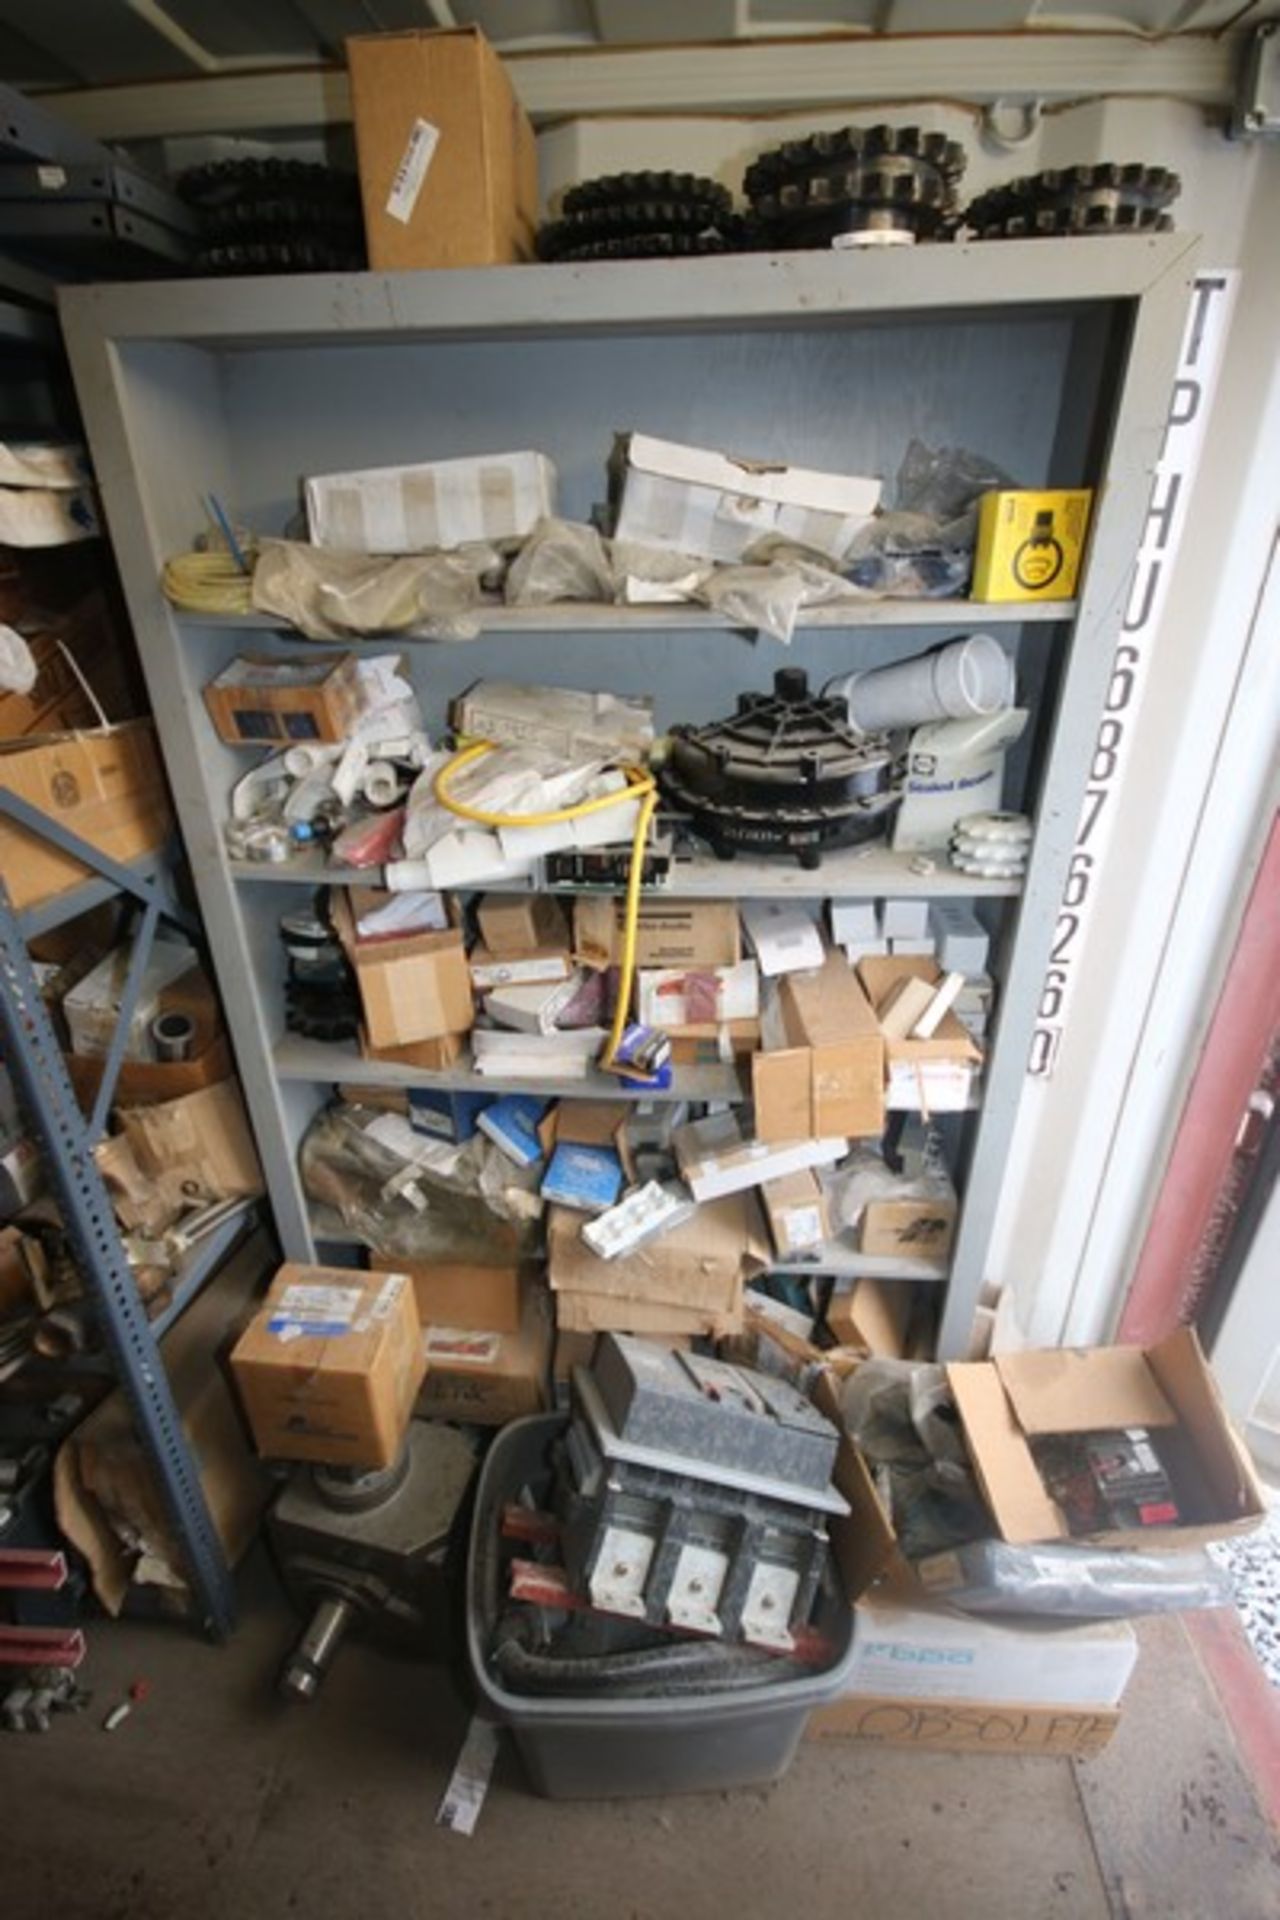 Assorted Spare Parts on 4-Shelving Units, Includes Sprockets, Gauges, Valves, Bearings, Motors, - Image 4 of 17